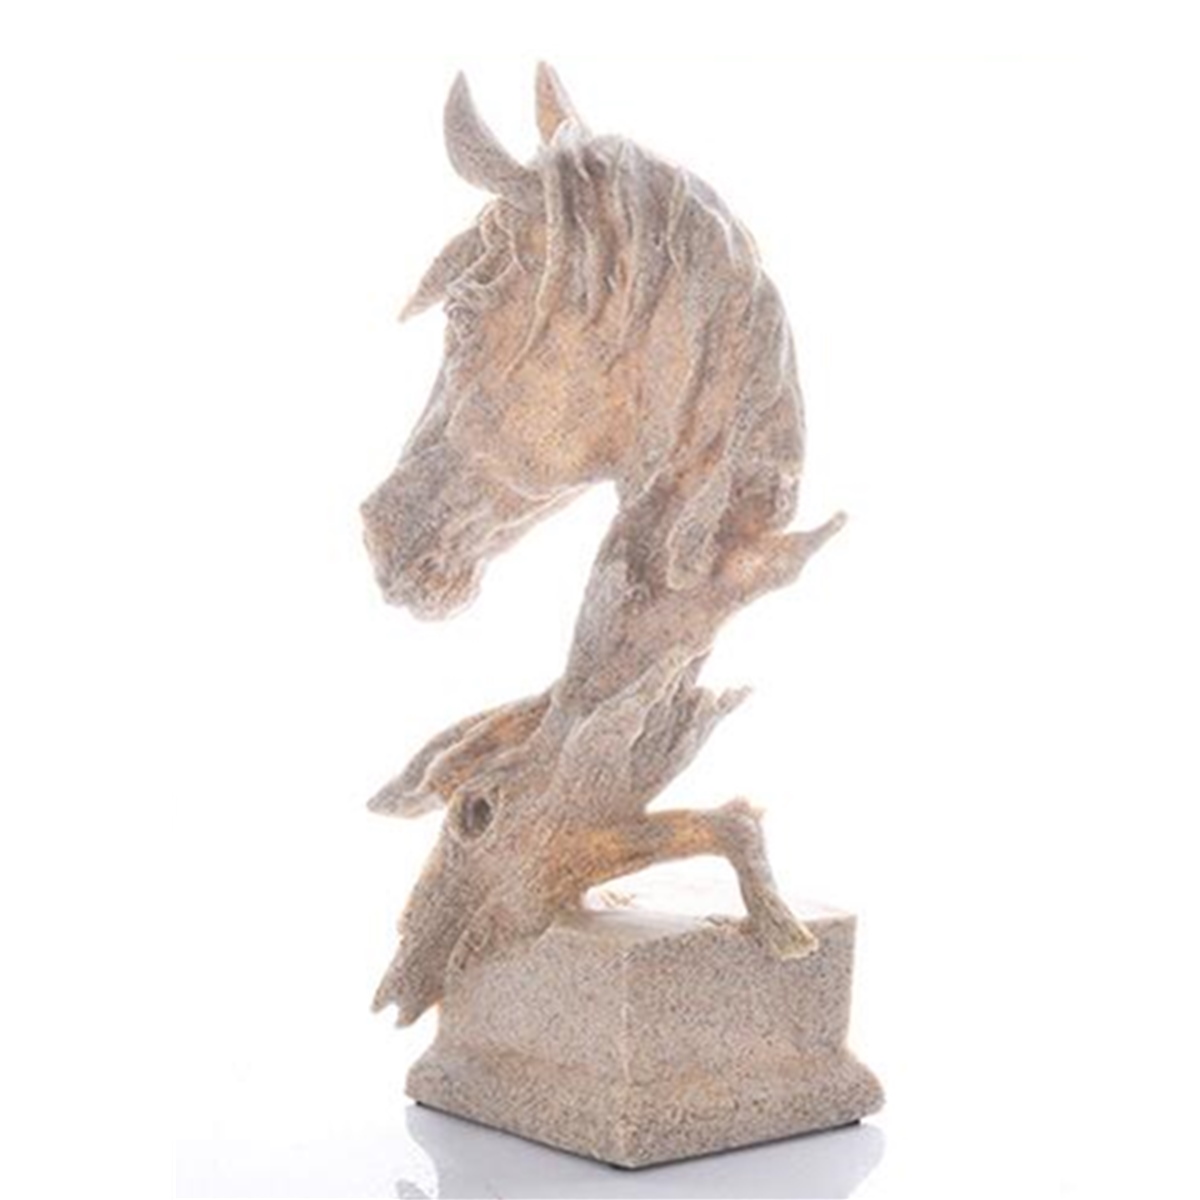 Vintage-Statue-Horse-Head-Bust-Ornament-Sculpture-Figurine-Home-Feature-Display-Decorations-1639659-4